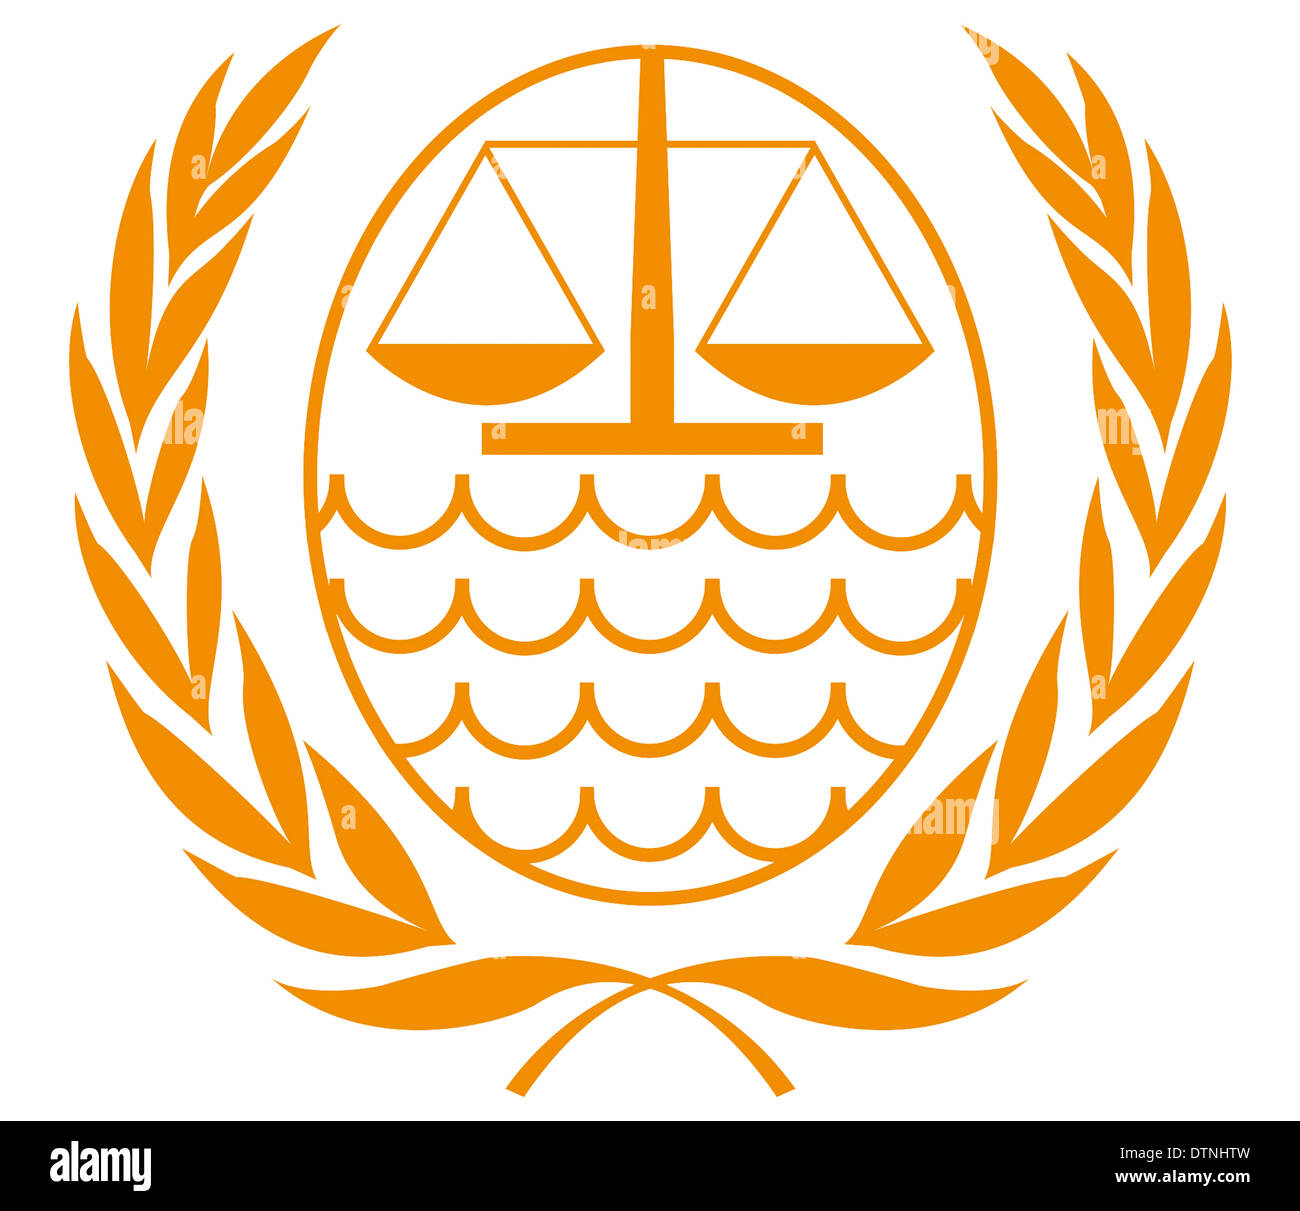 Logo of the International Tribunal for the Law of the Sea ITLOS with seat in Hamburg. Stock Photo